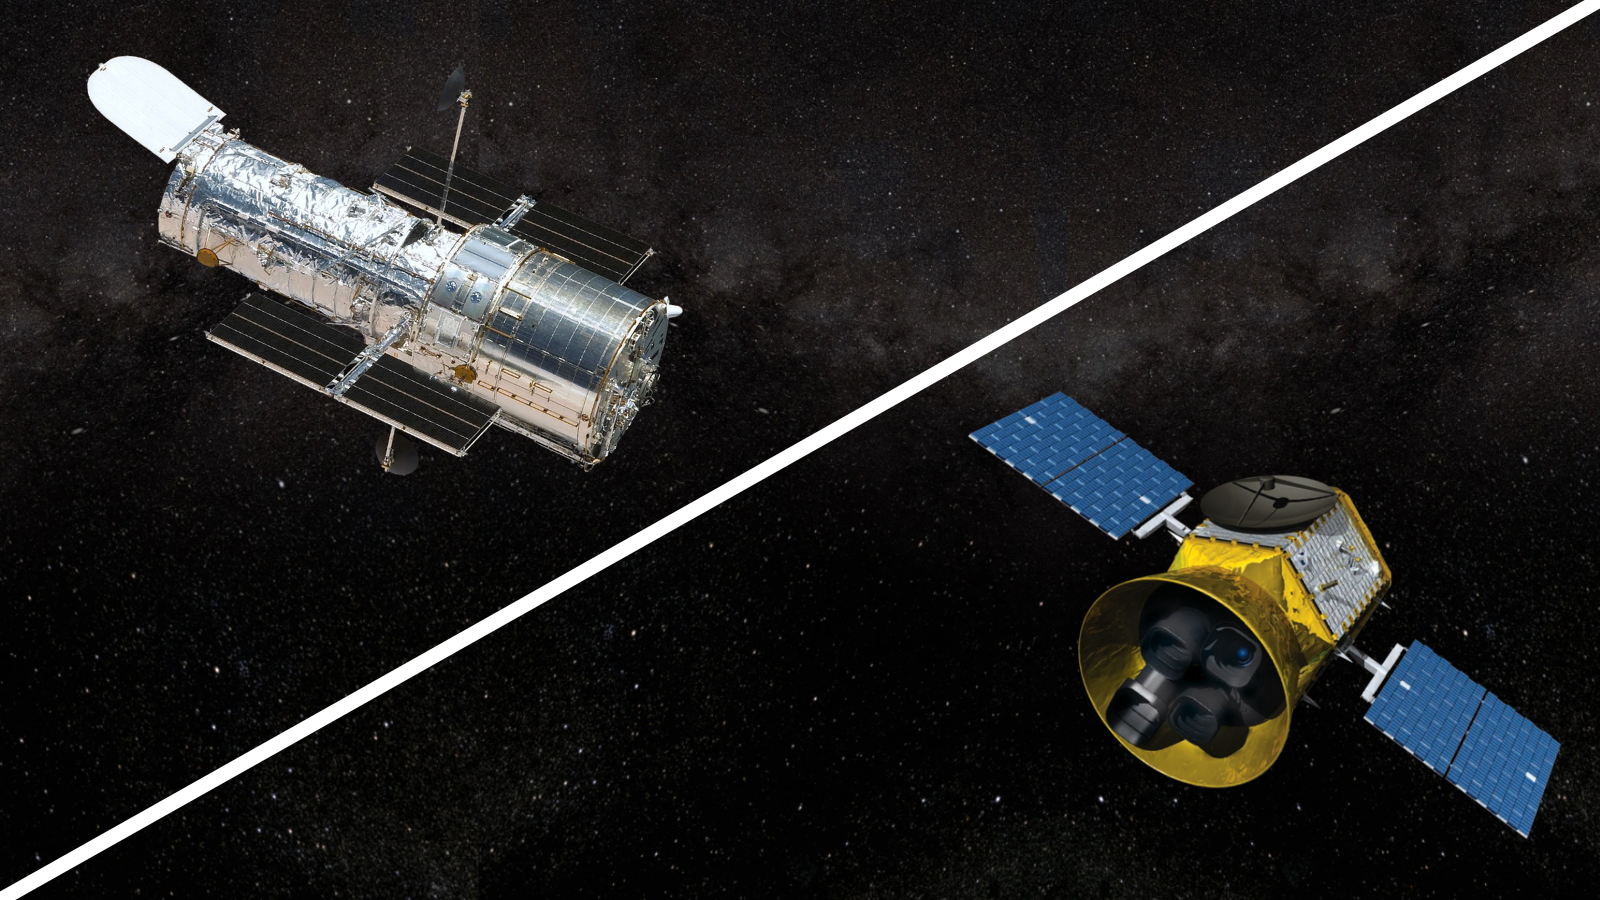 NASA's Hubble Telescope is back in action — but its TESS exoplanet hunter may now be in trouble